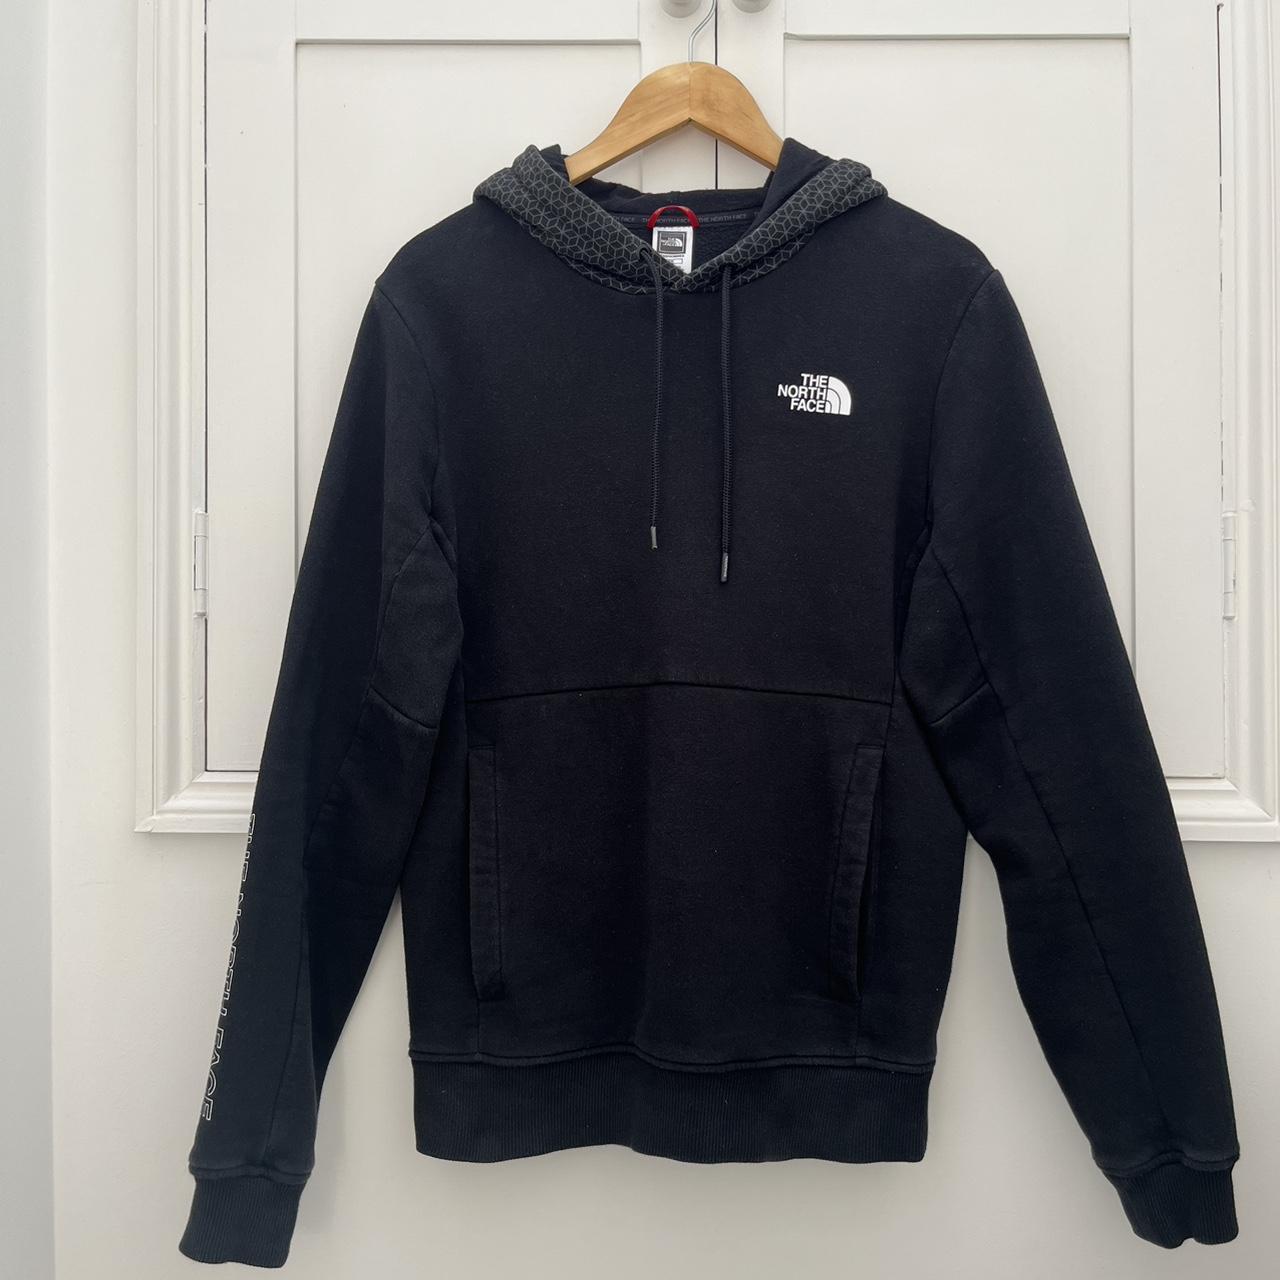 The North Face Hoodie, Black, Size small Great... - Depop